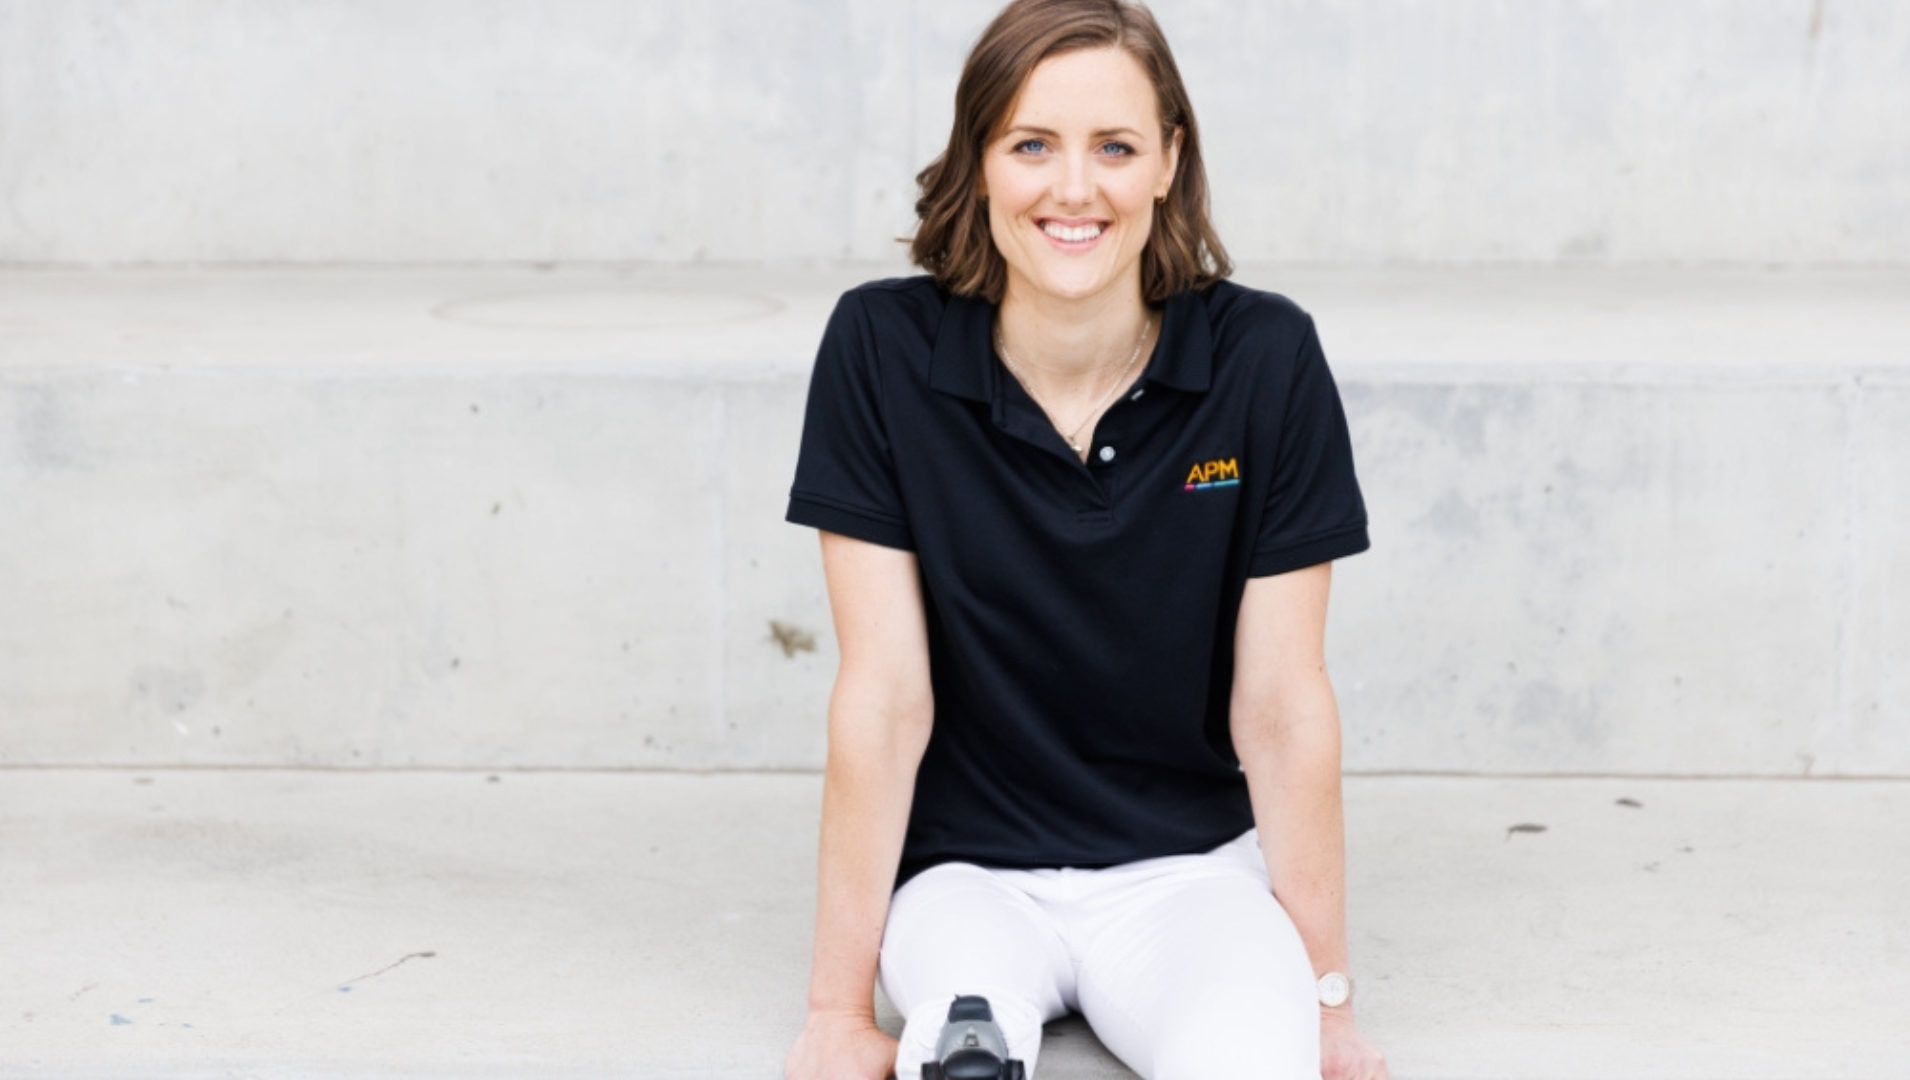 Ellie Cole, wearing an APM poloshirt is sitting on a limestone step, smiling